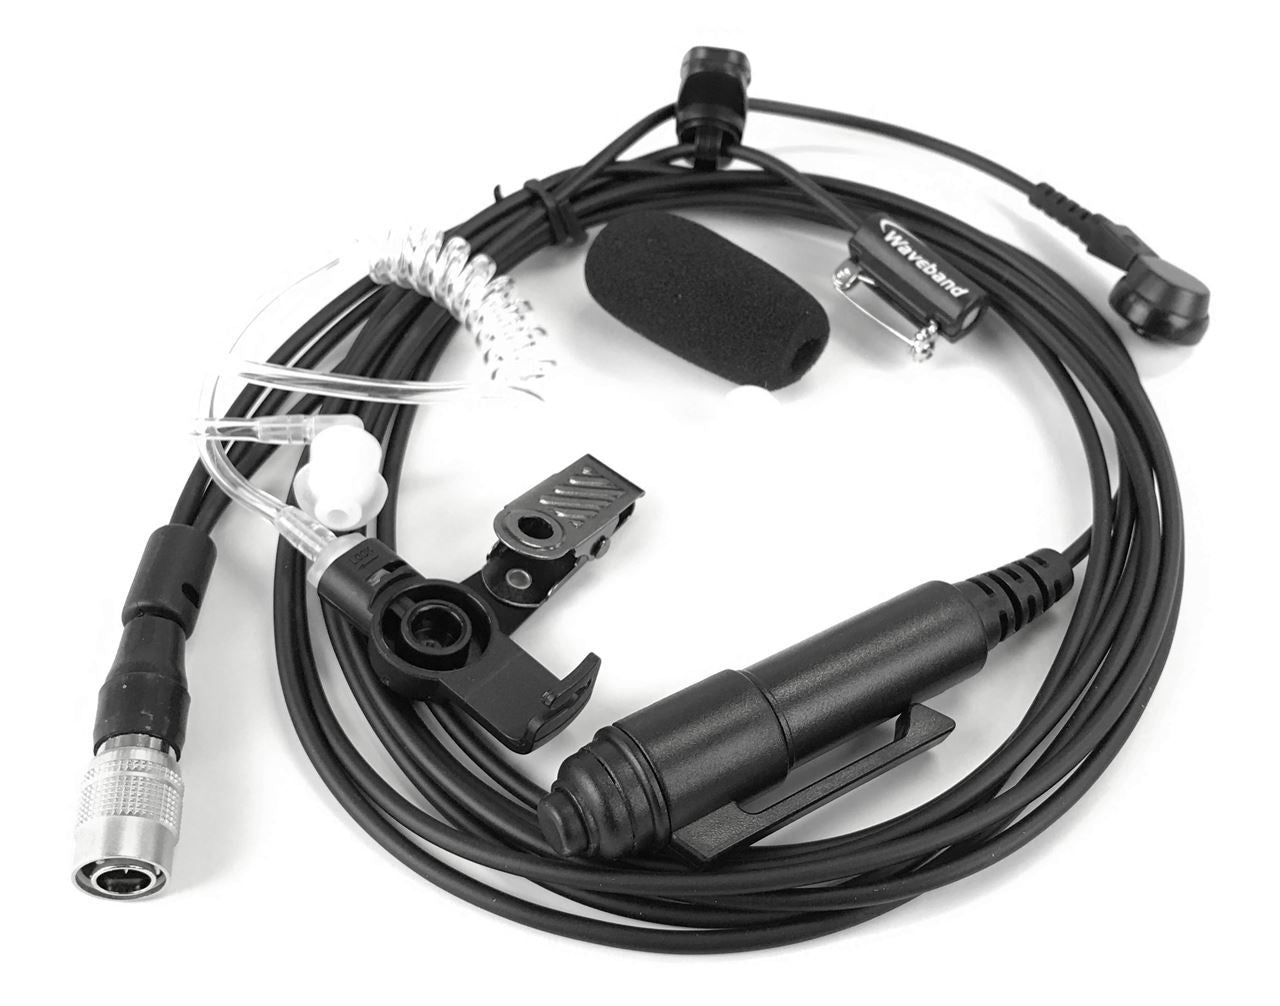 Comparable KHS-12 3 wire mini lapel mic with earphone for use with the Kenwood NX-5410d Portable Radio - Waveband Communications